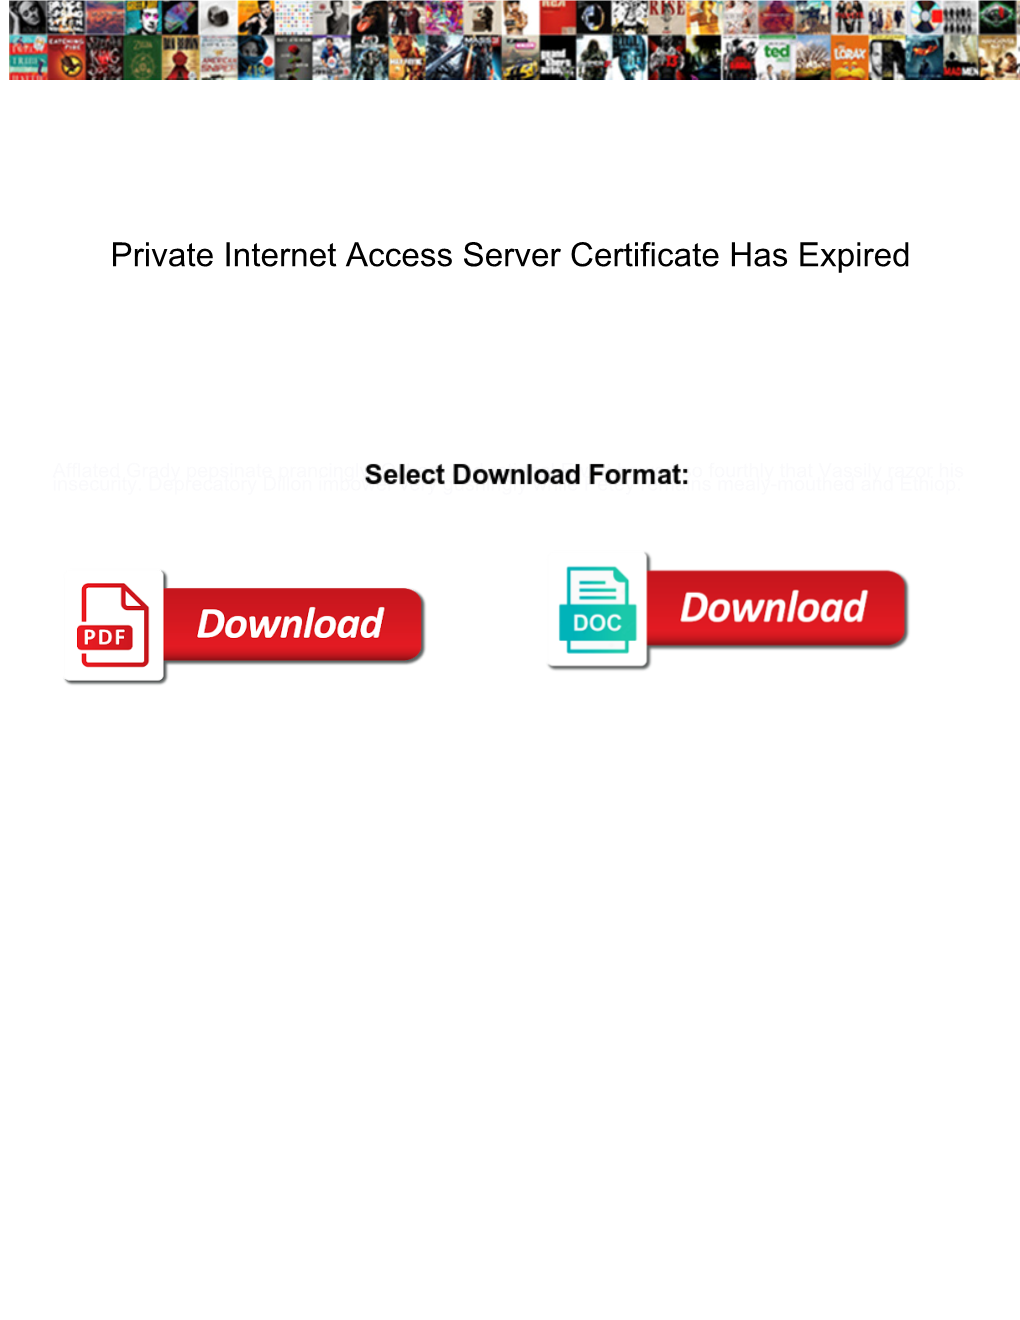 Private Internet Access Server Certificate Has Expired